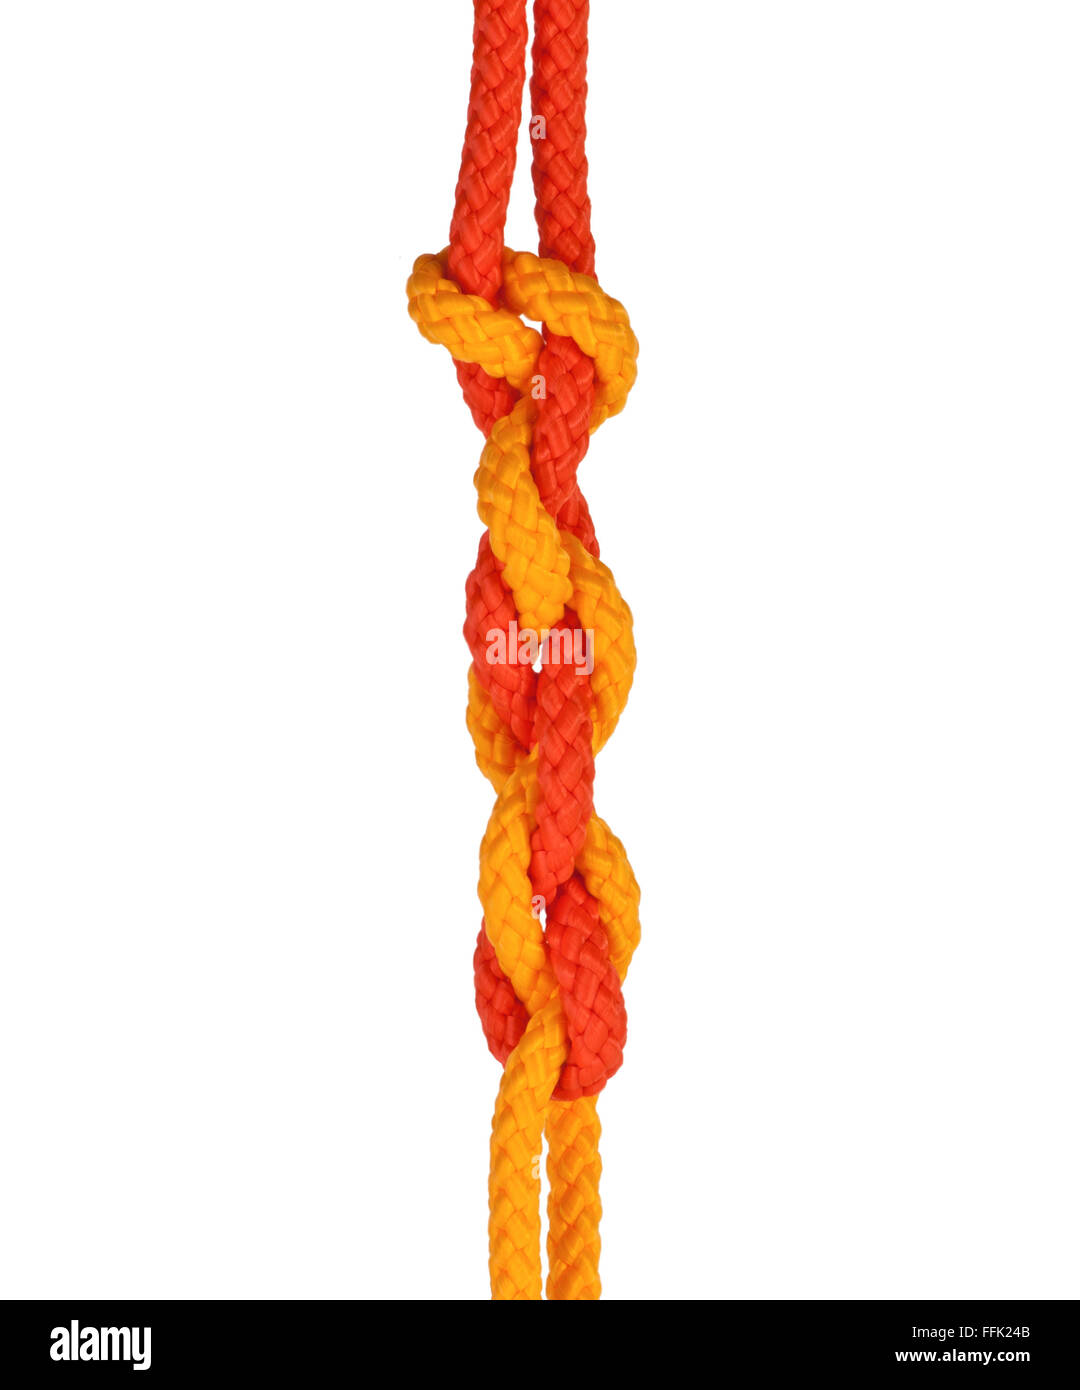 Strong Rope with Single Knot - Concept Image Stock Photo - Image of burl,  rope: 279595674